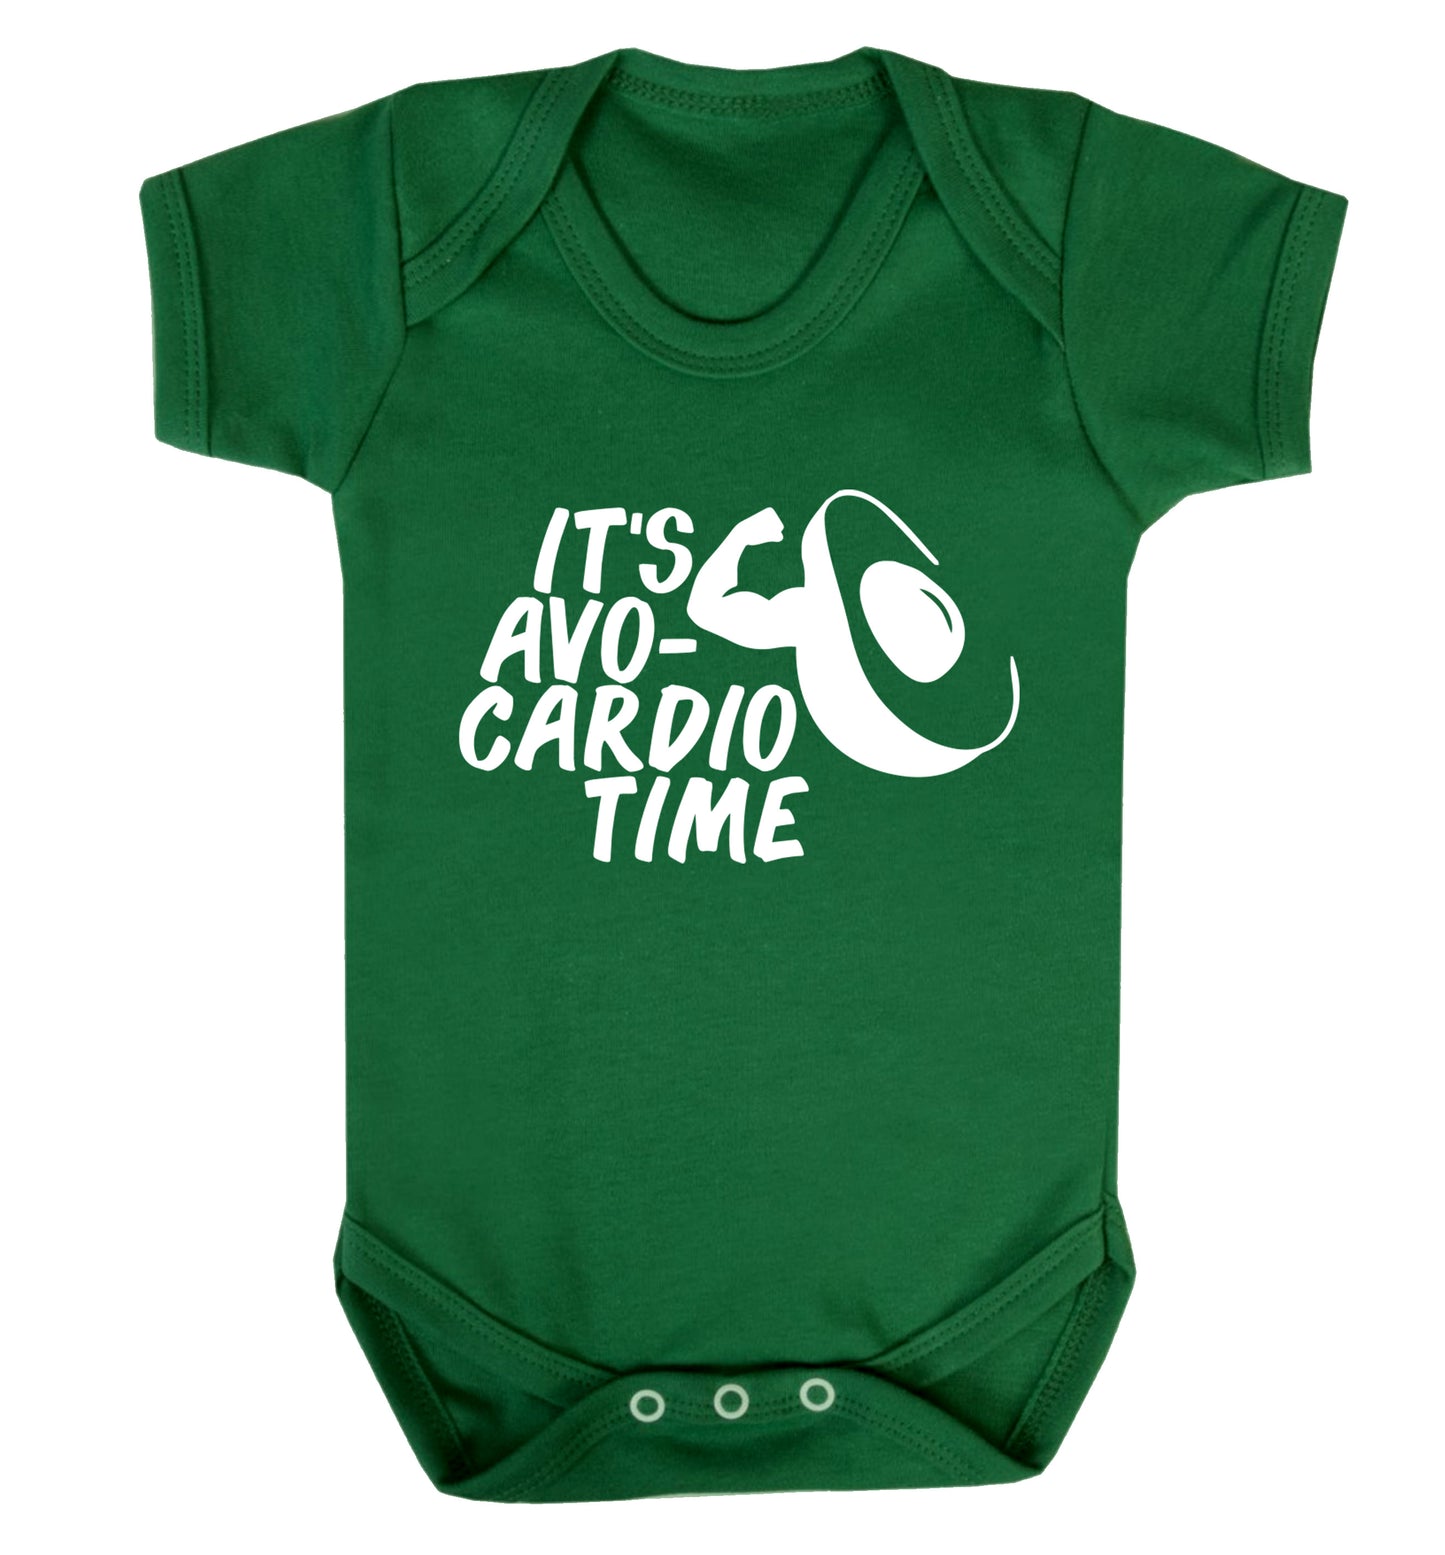 It's avo-cardio time Baby Vest green 18-24 months